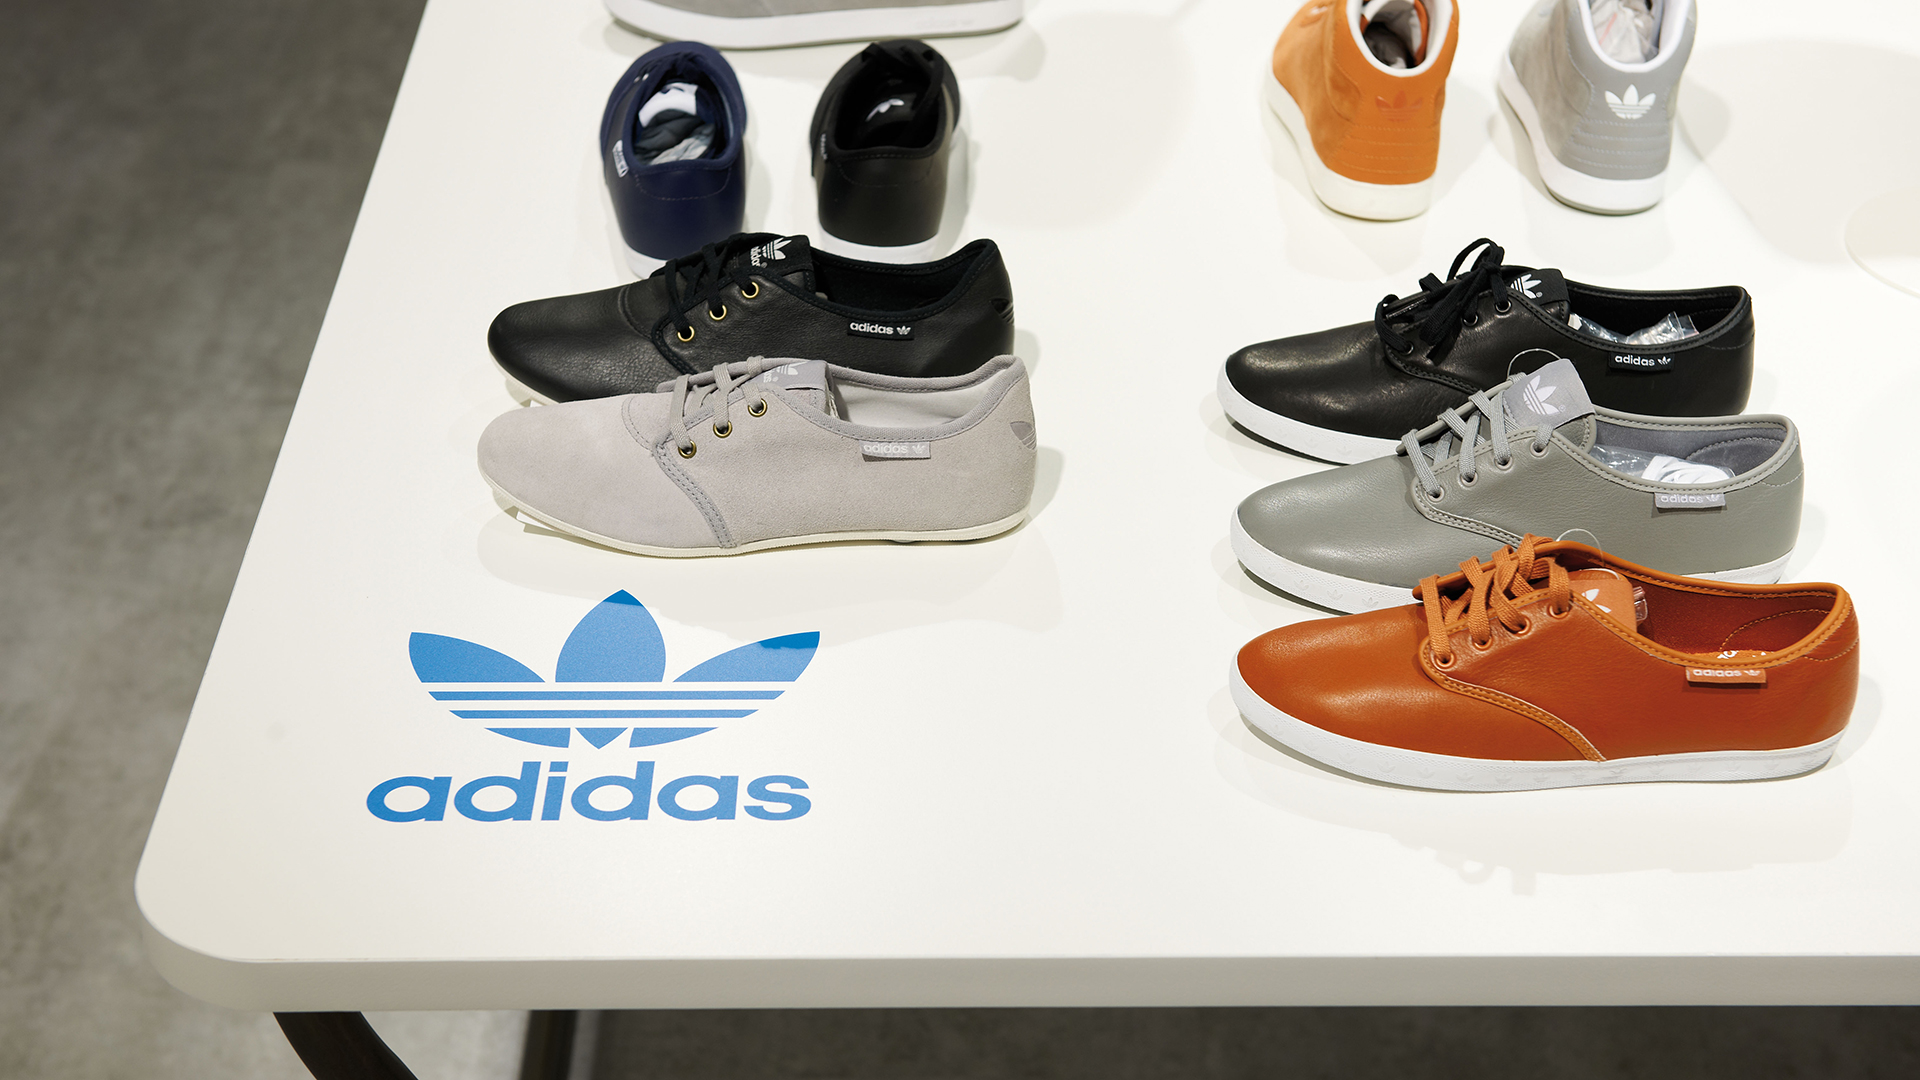 Dart stages the shop concept for adidas Originals in the cities of Fribourg, Zurich and Munich